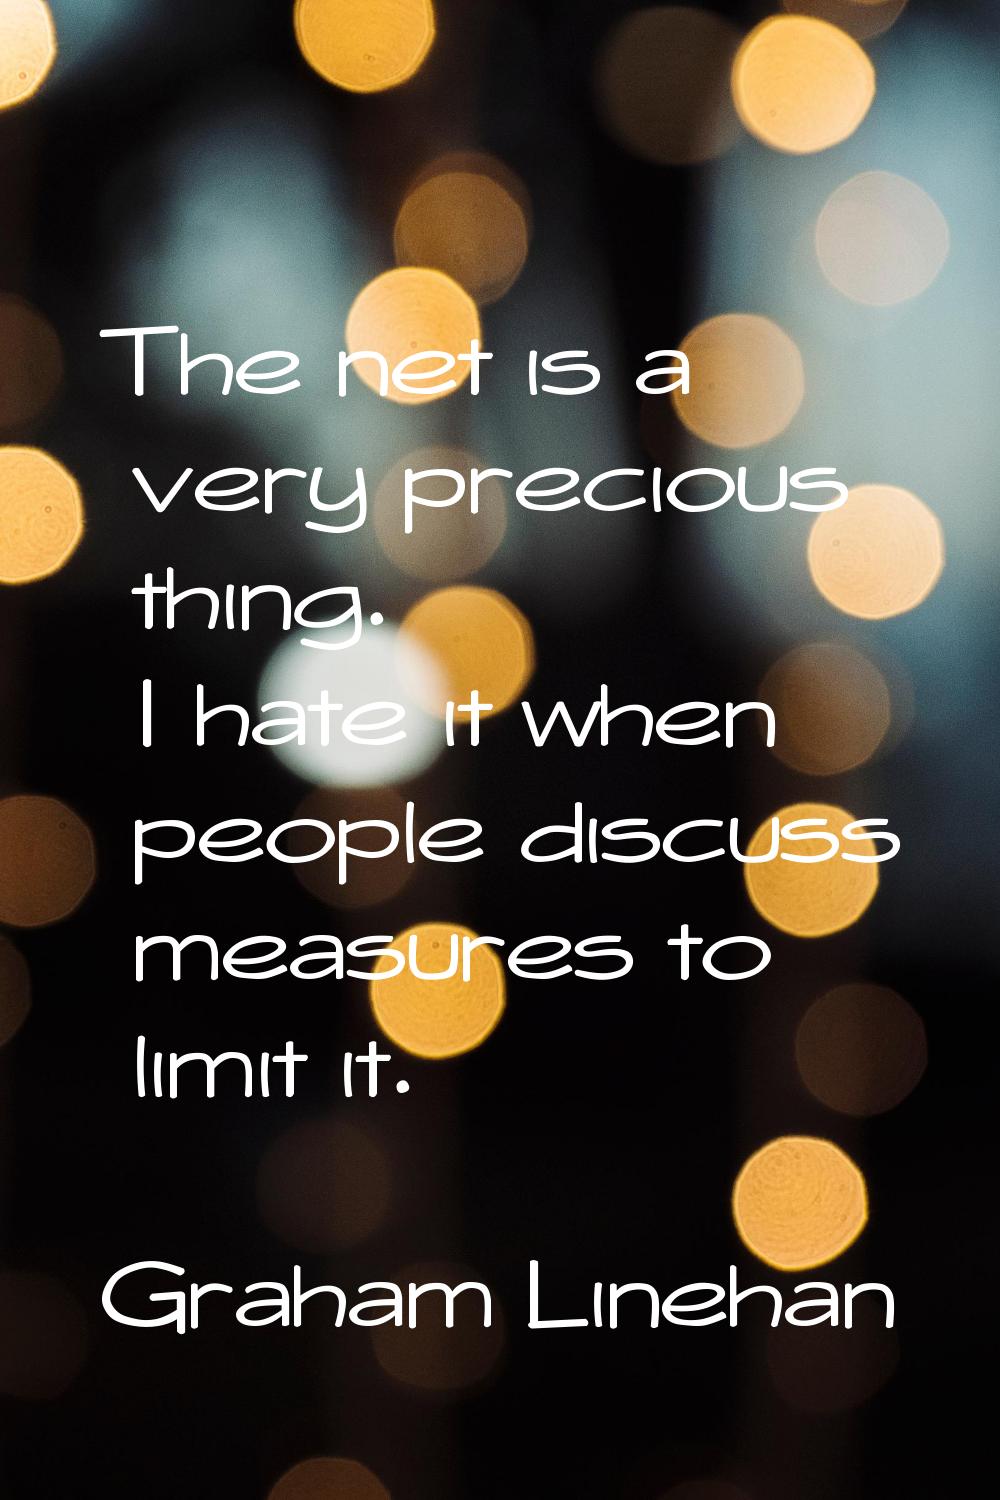 The net is a very precious thing. I hate it when people discuss measures to limit it.